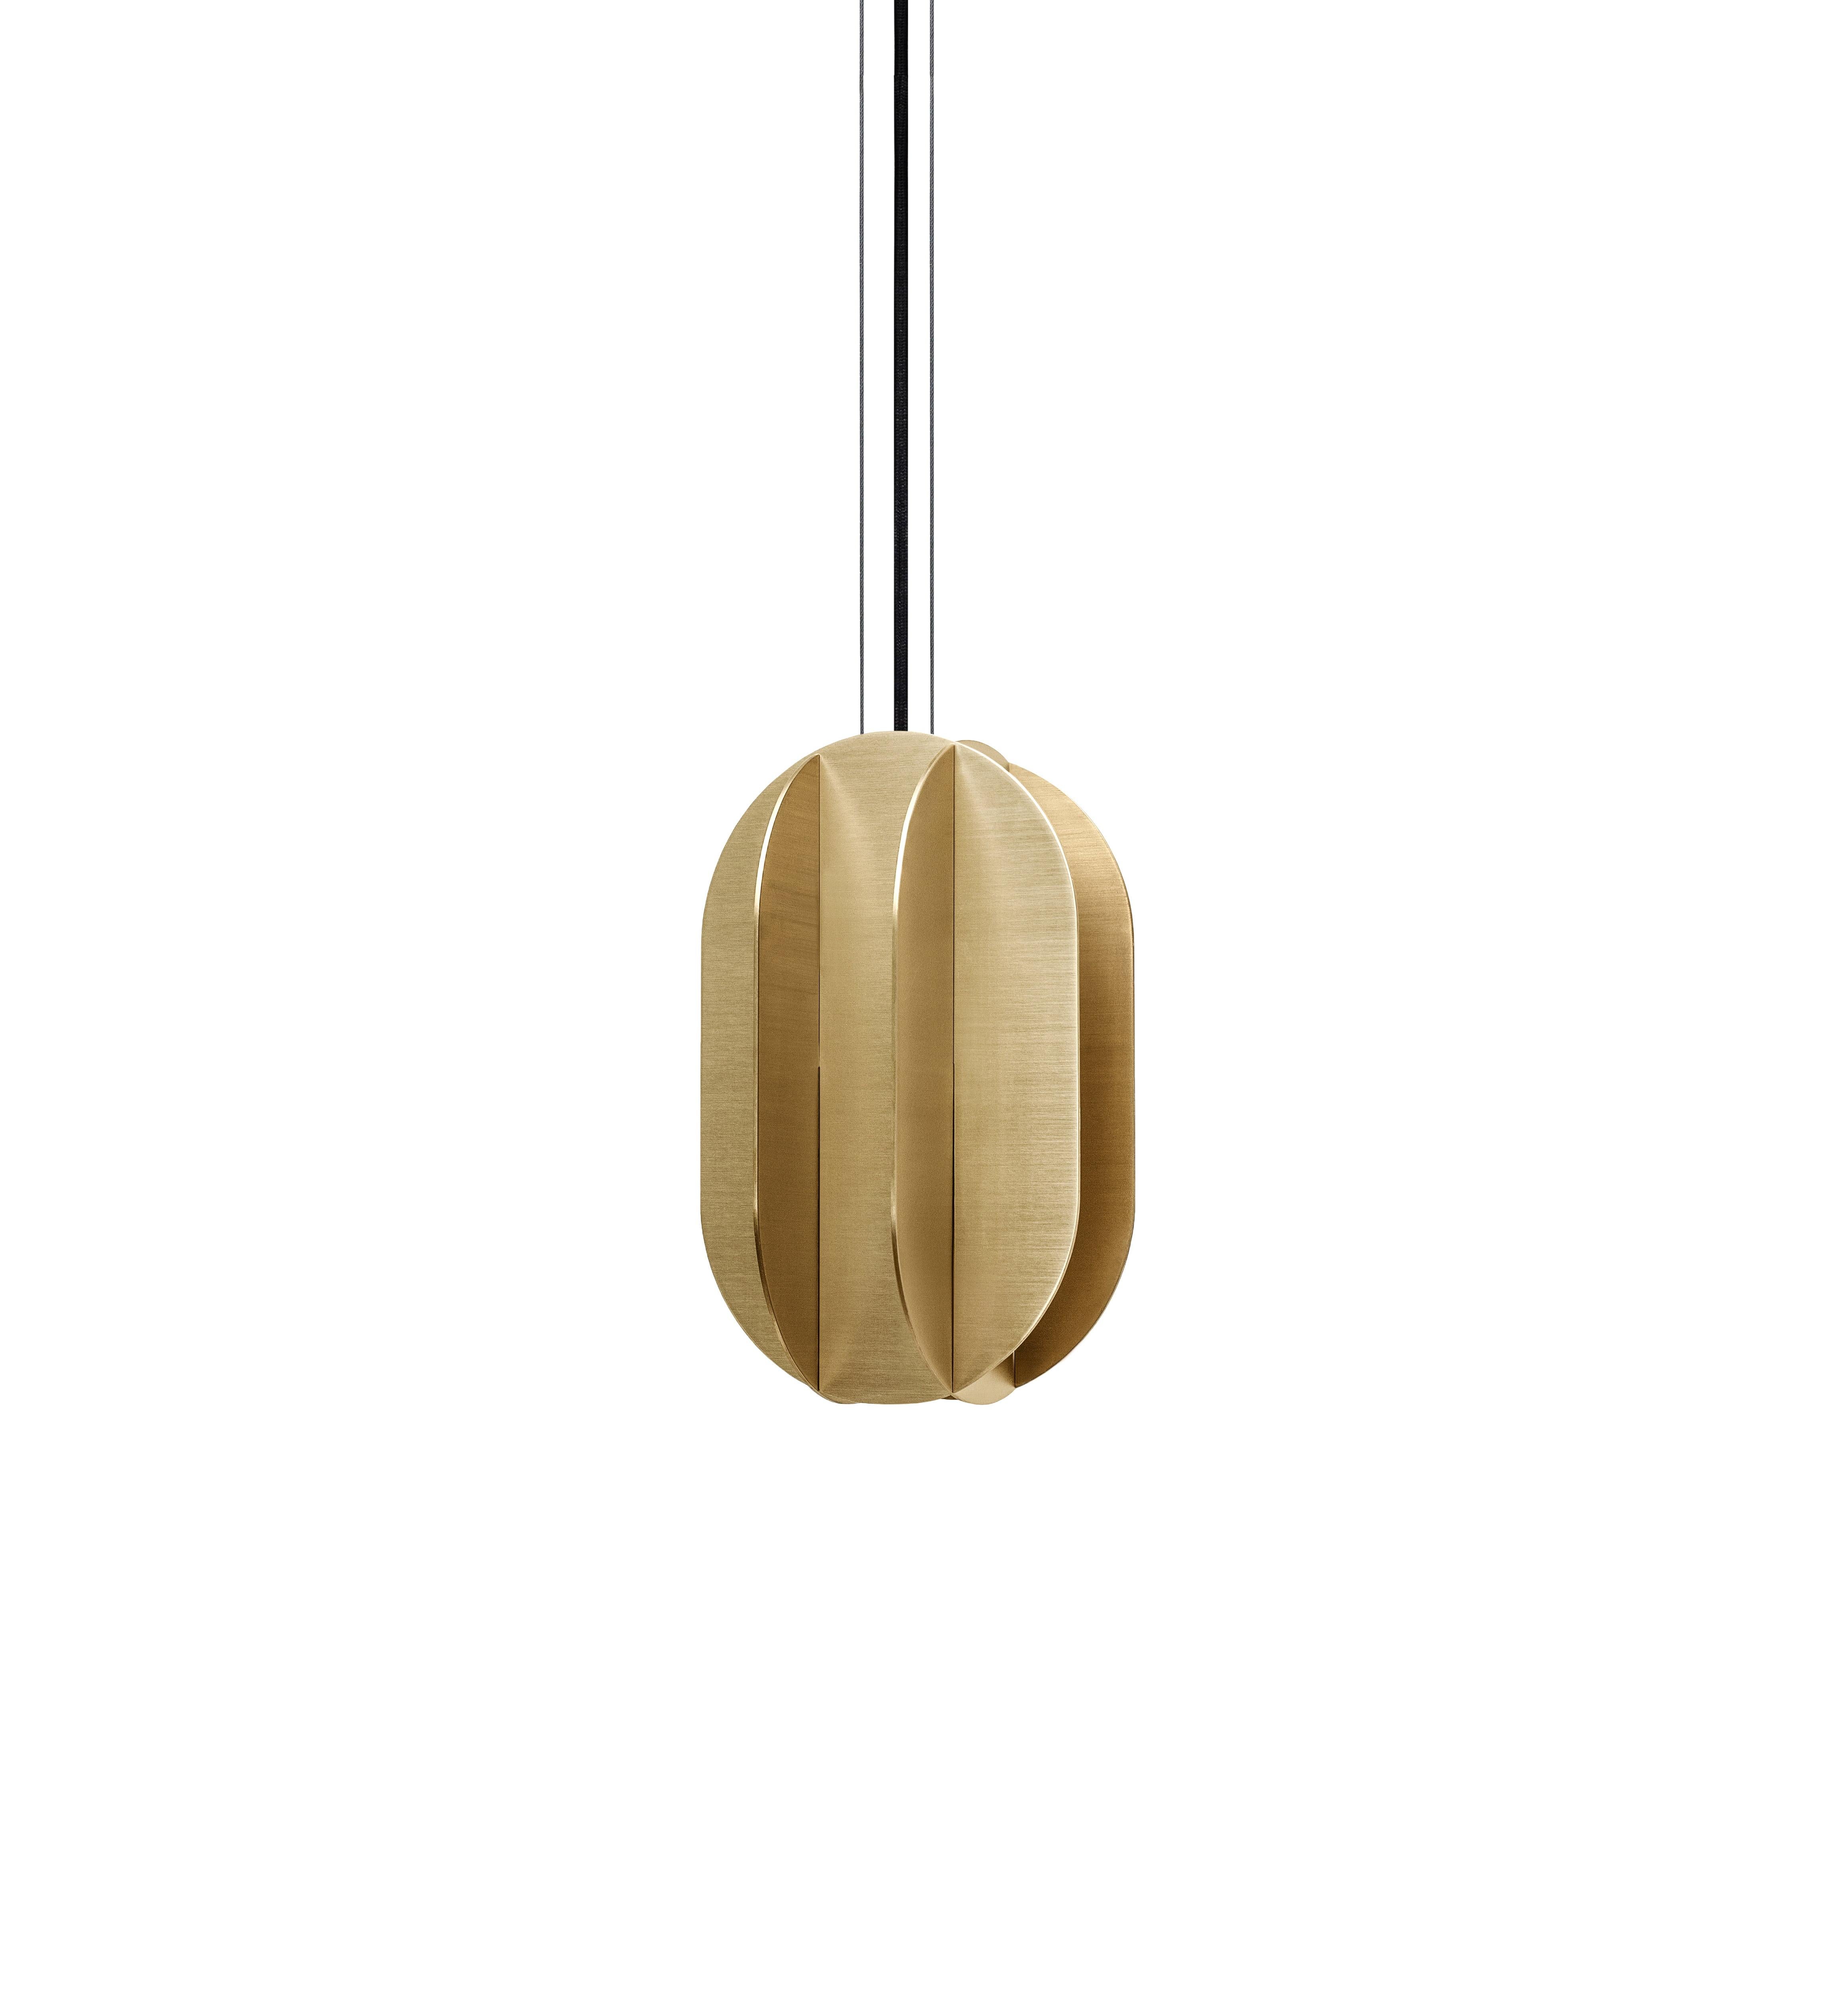 Set of Three Contemporary Pendant Lamp El Lamps CS3 by Noom in Stainless Steel 2